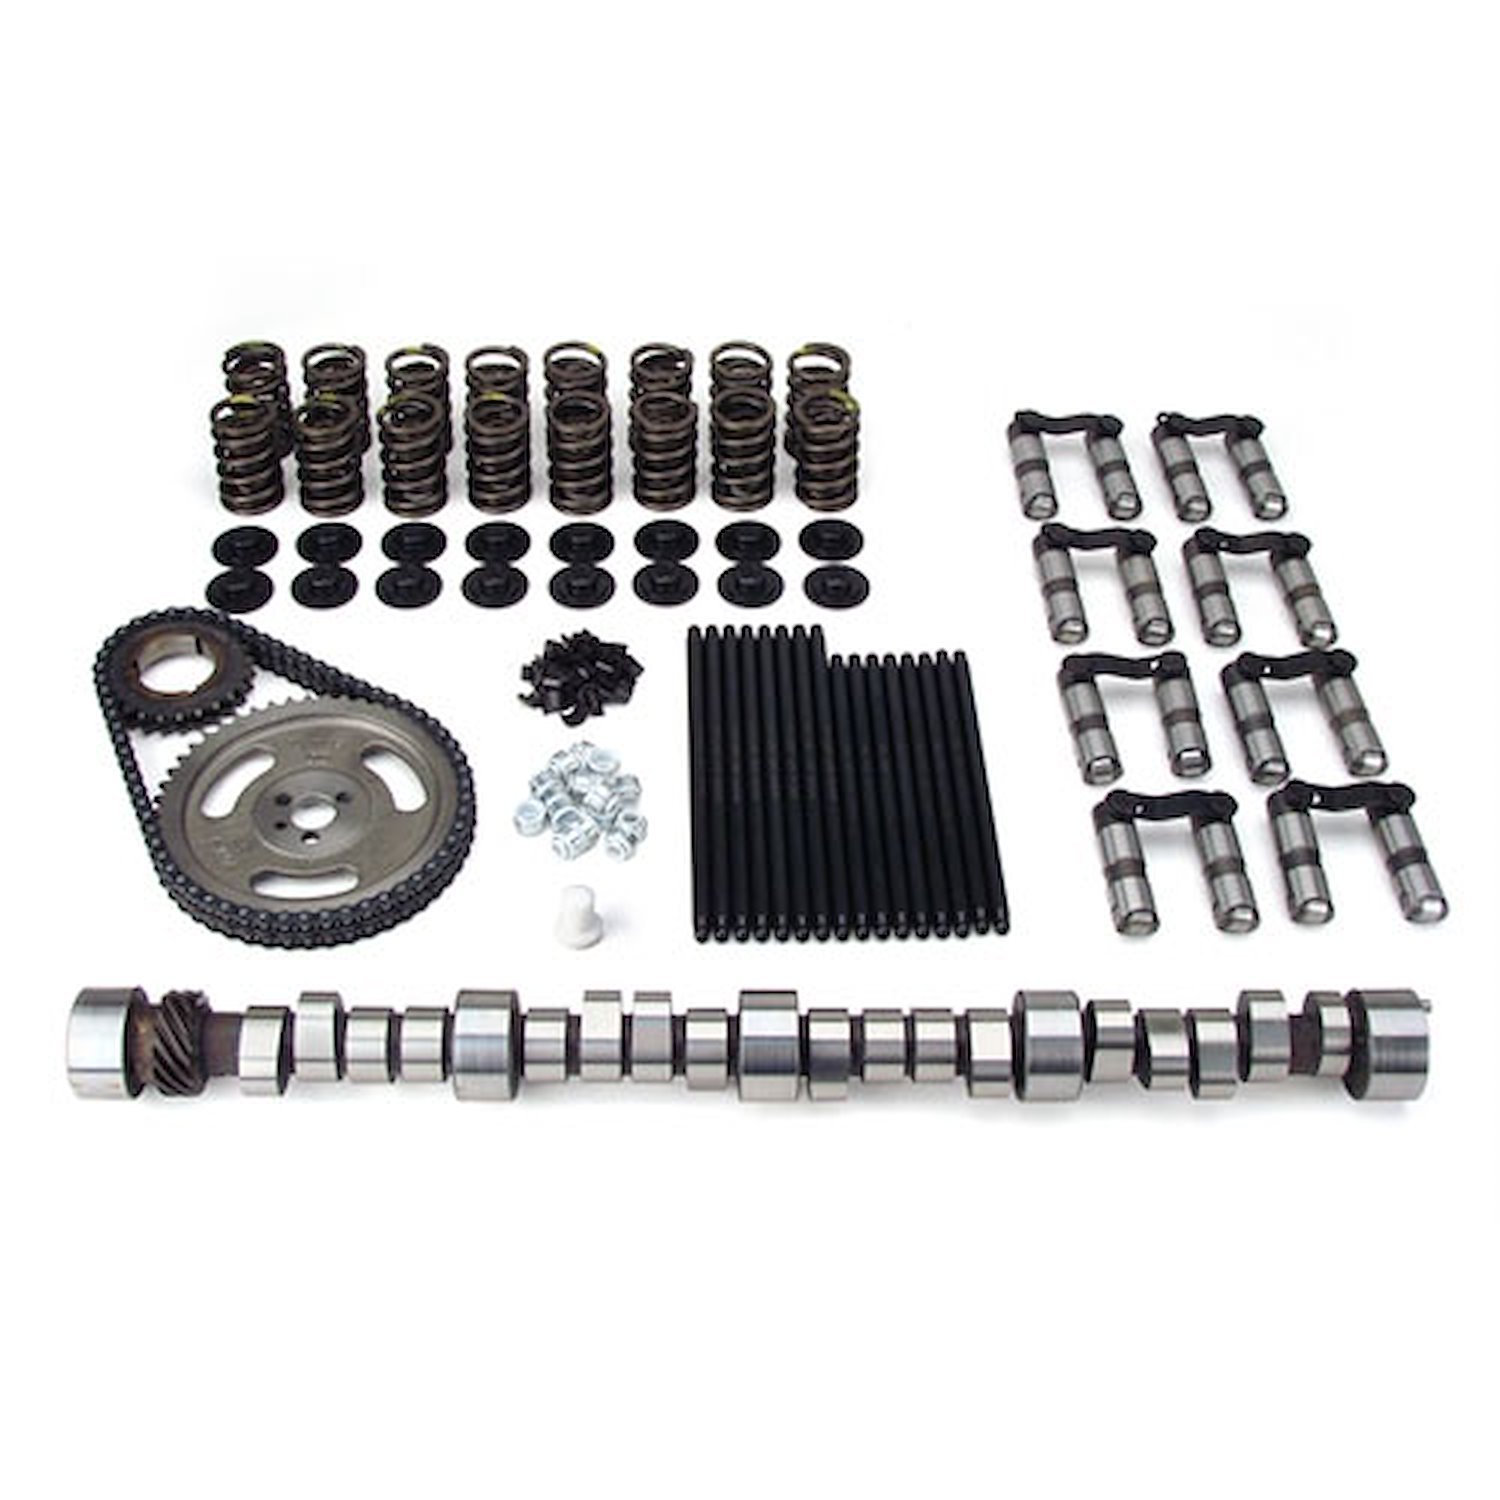 Big Mutha Thumpr Hydraulic Roller Camshaft Complete Kit Lift: .533"/.519"